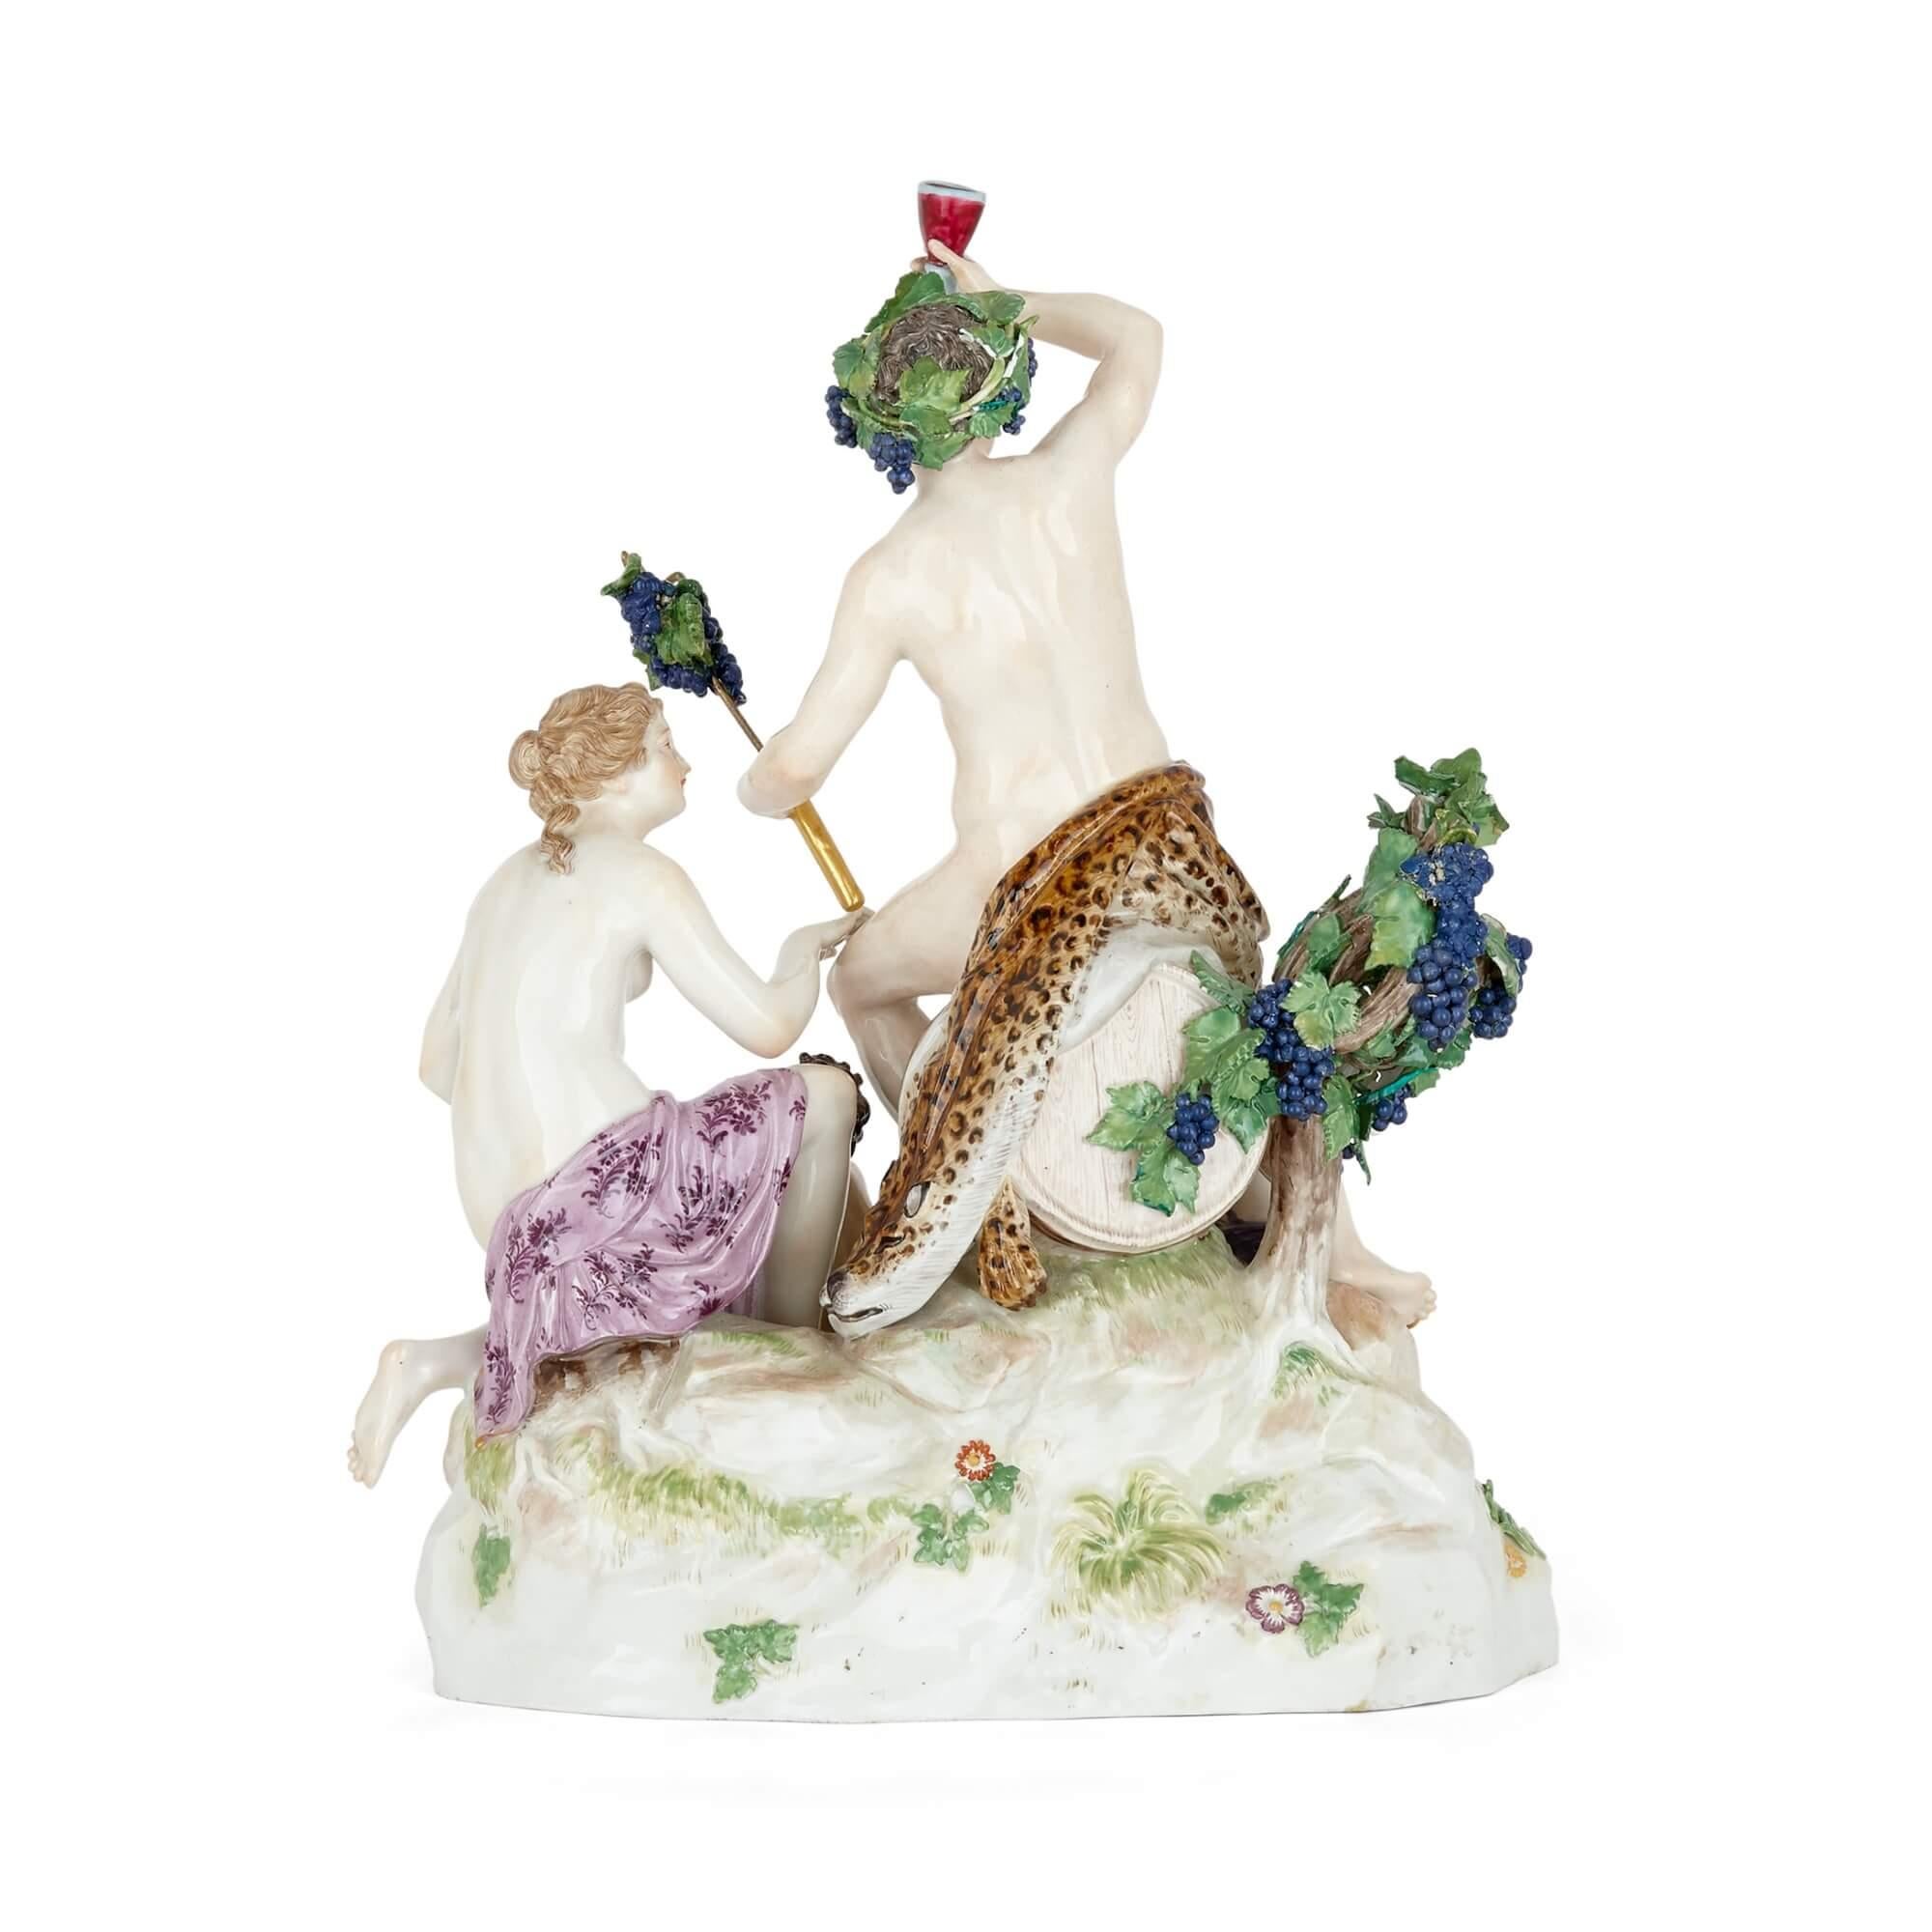 Rococo Antique Porcelain Group of Bacchus and Attendants by Meissen For Sale